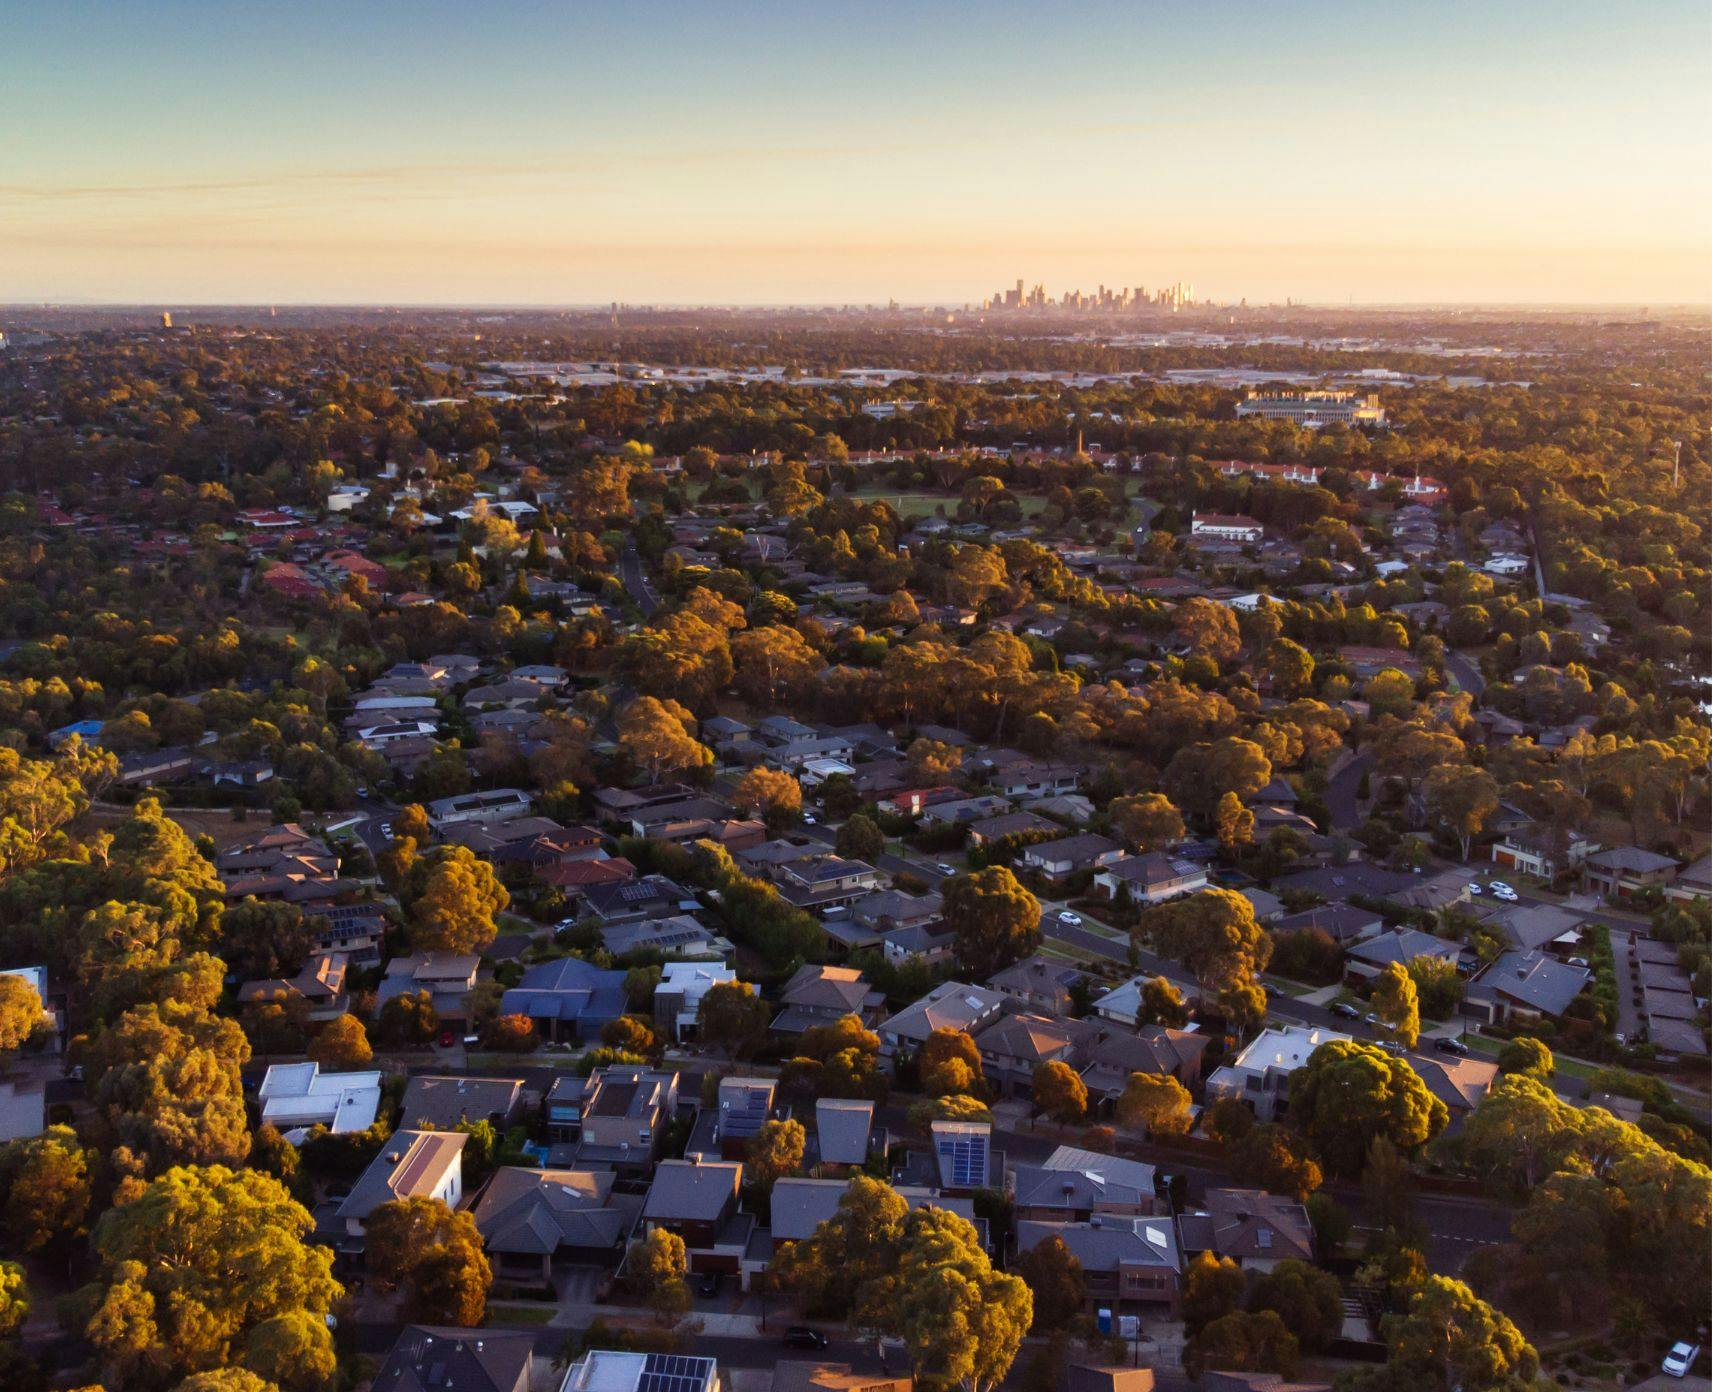 View from an outer Melbourne suburb towards the CBD